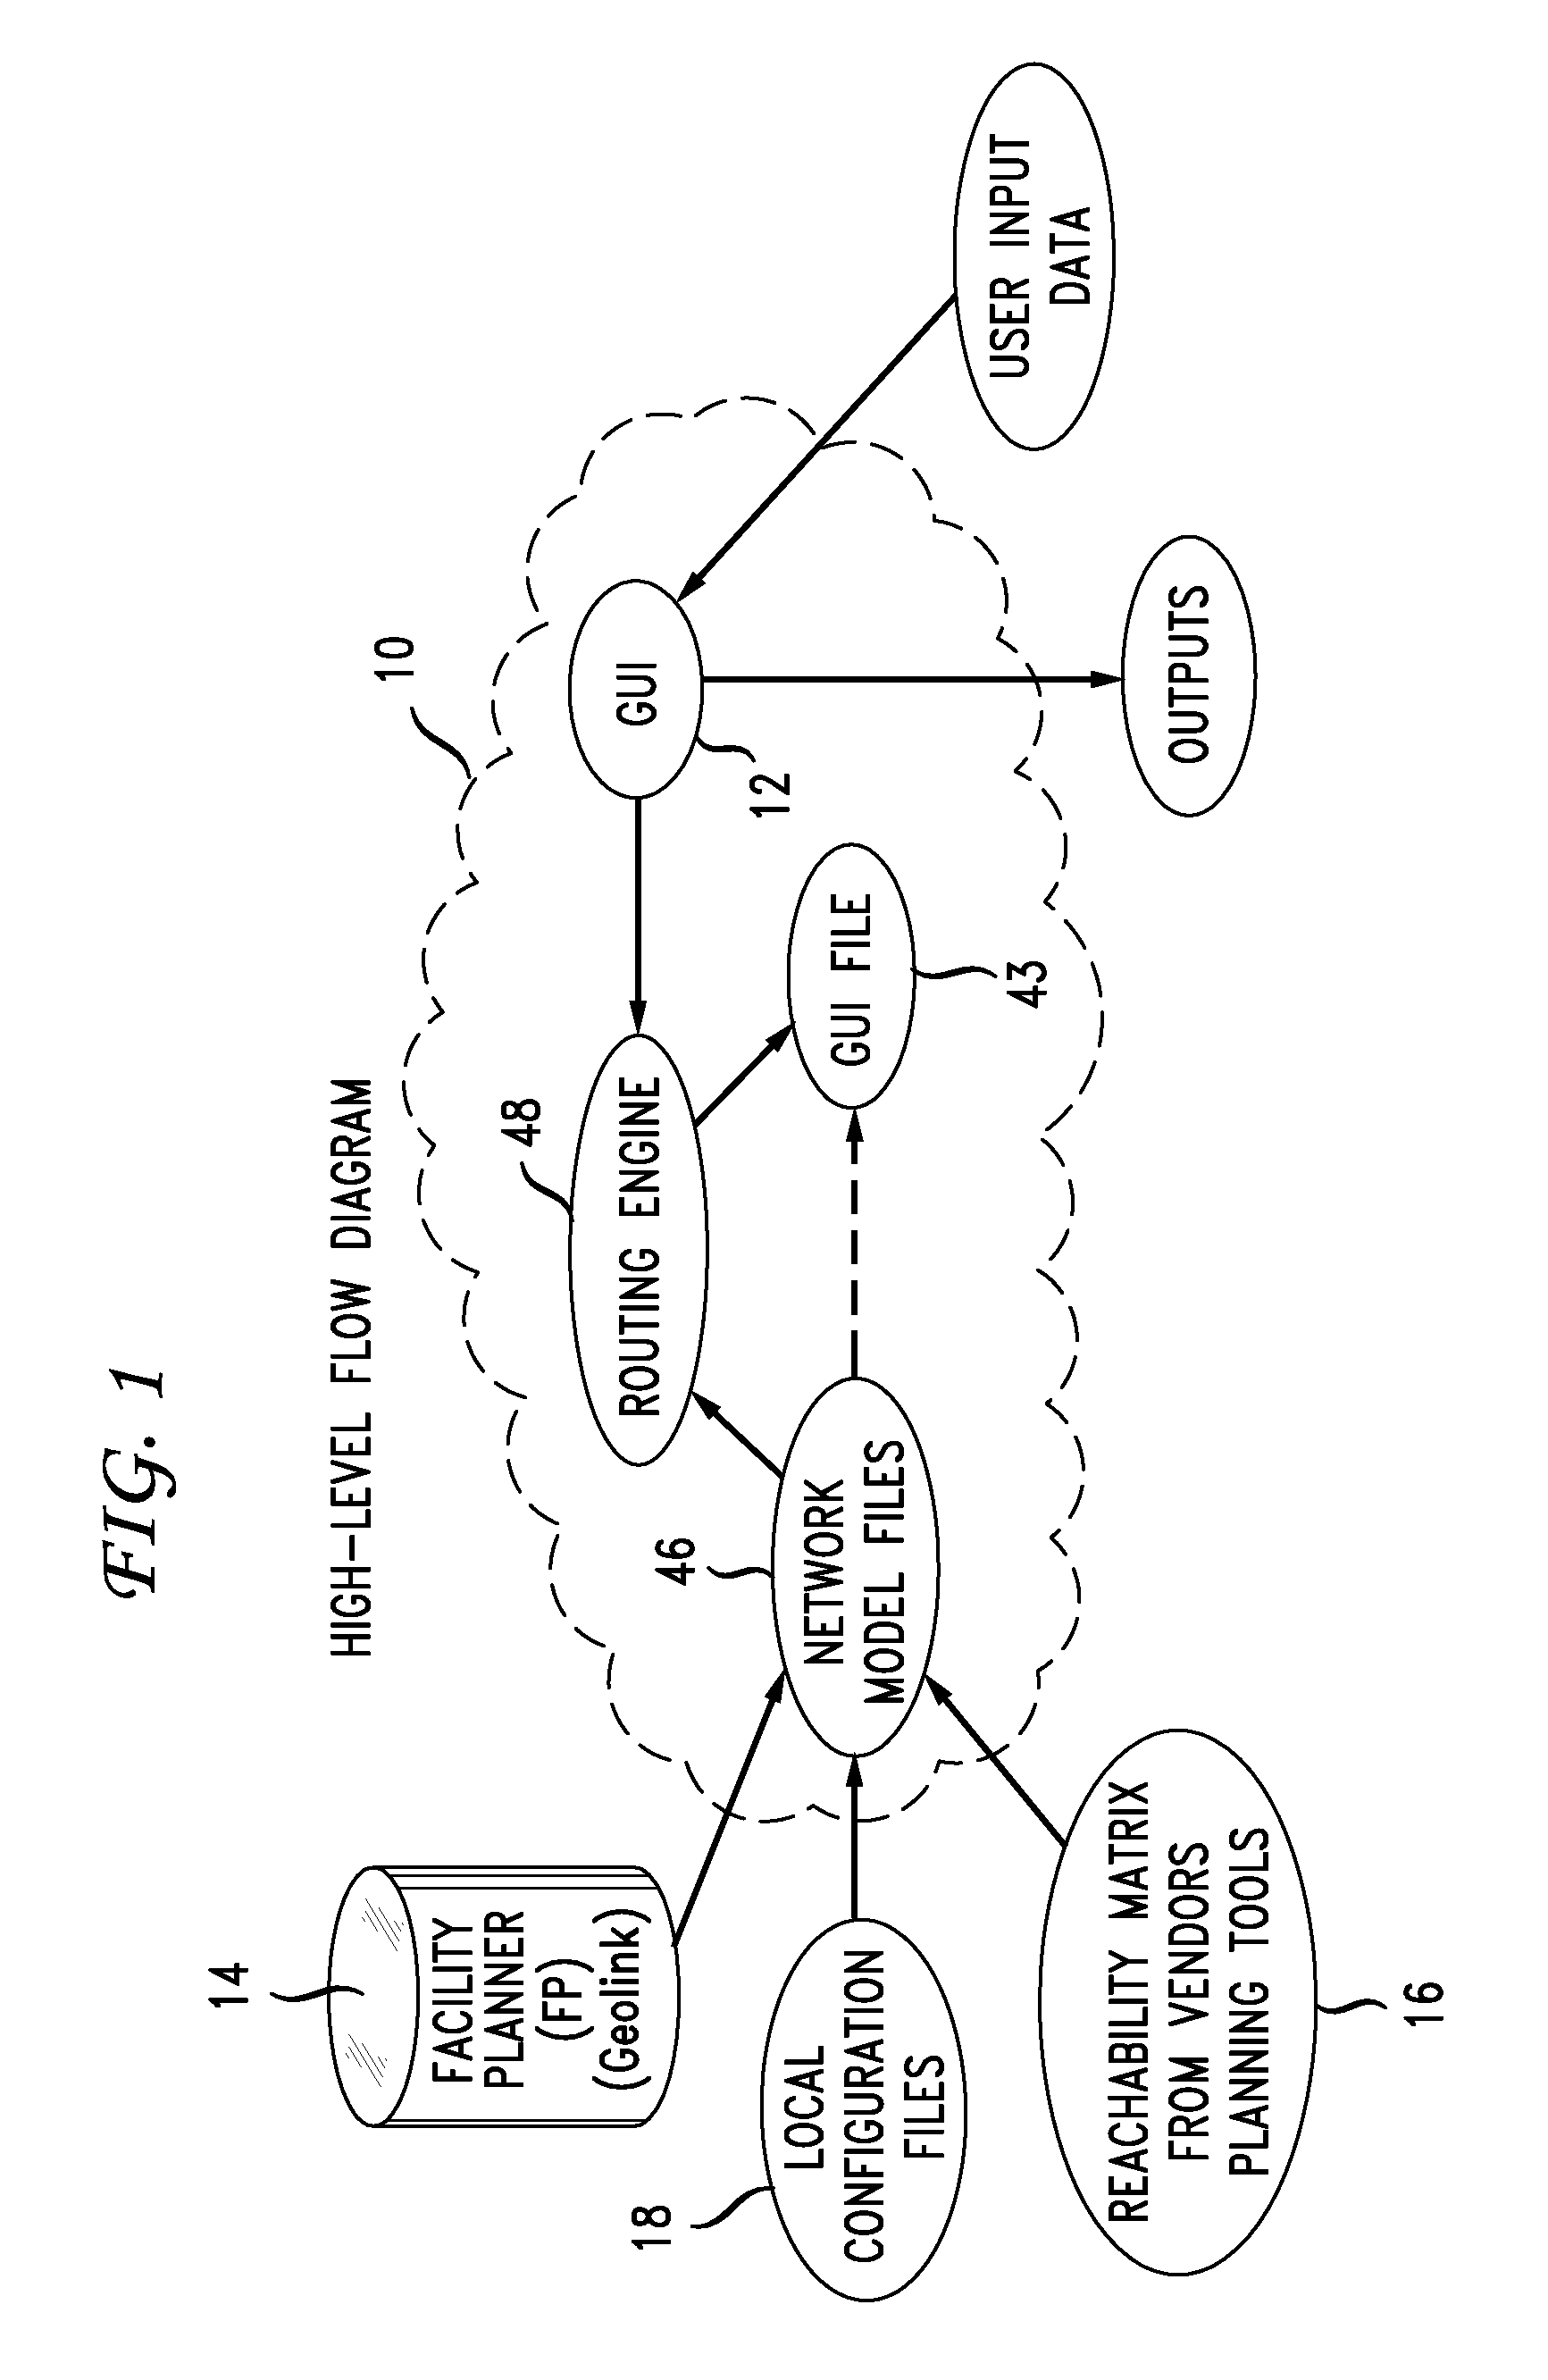 Reachability matrices spanning multiple domains in an optical network